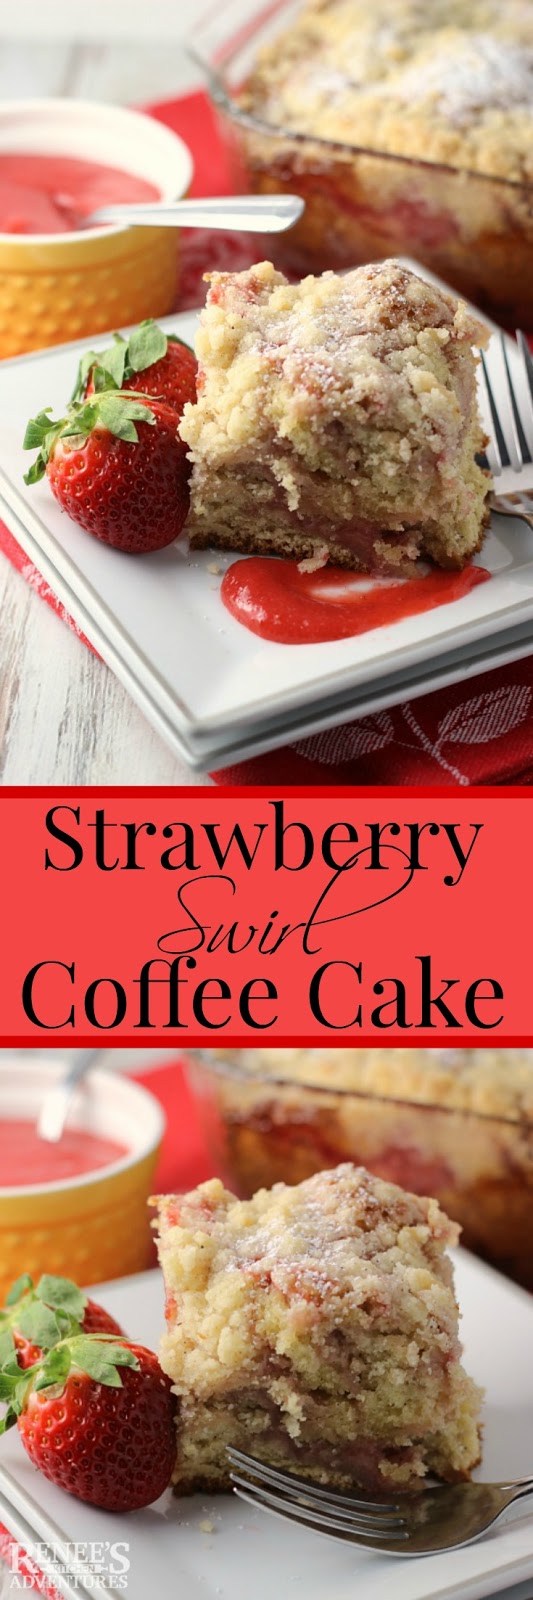 Strawberry Swirl Coffee Cake | Renee's Kitchen Adventures - dessert recipe for a moist coffee cake with fresh strawberry puree ribbons and a buttery streusel topping #SundaySupper #FLstrawberry @Flastrawberries